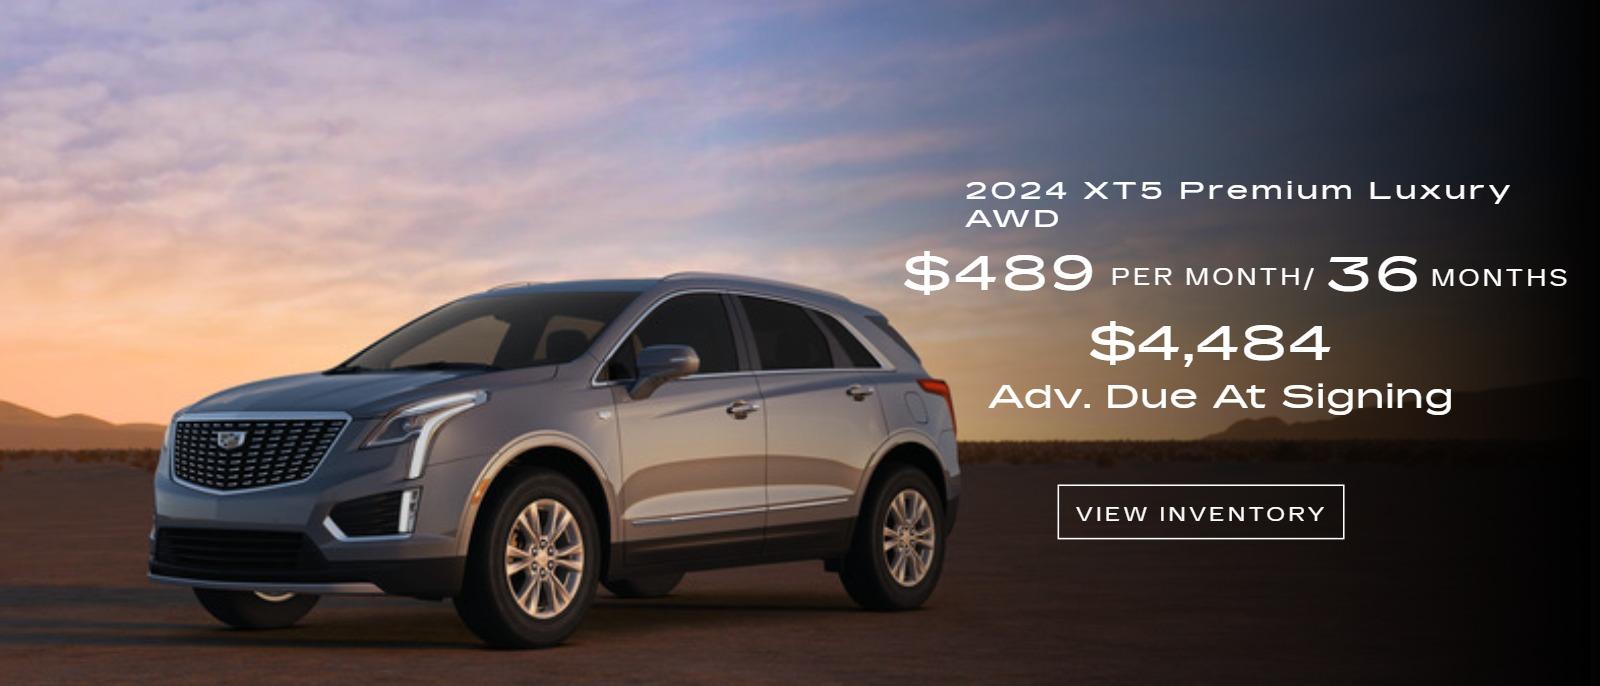 2024 XT5 Premium Luxury AWD:
$489 Per Month/36 months
$4,484 Adv. Due At Signing